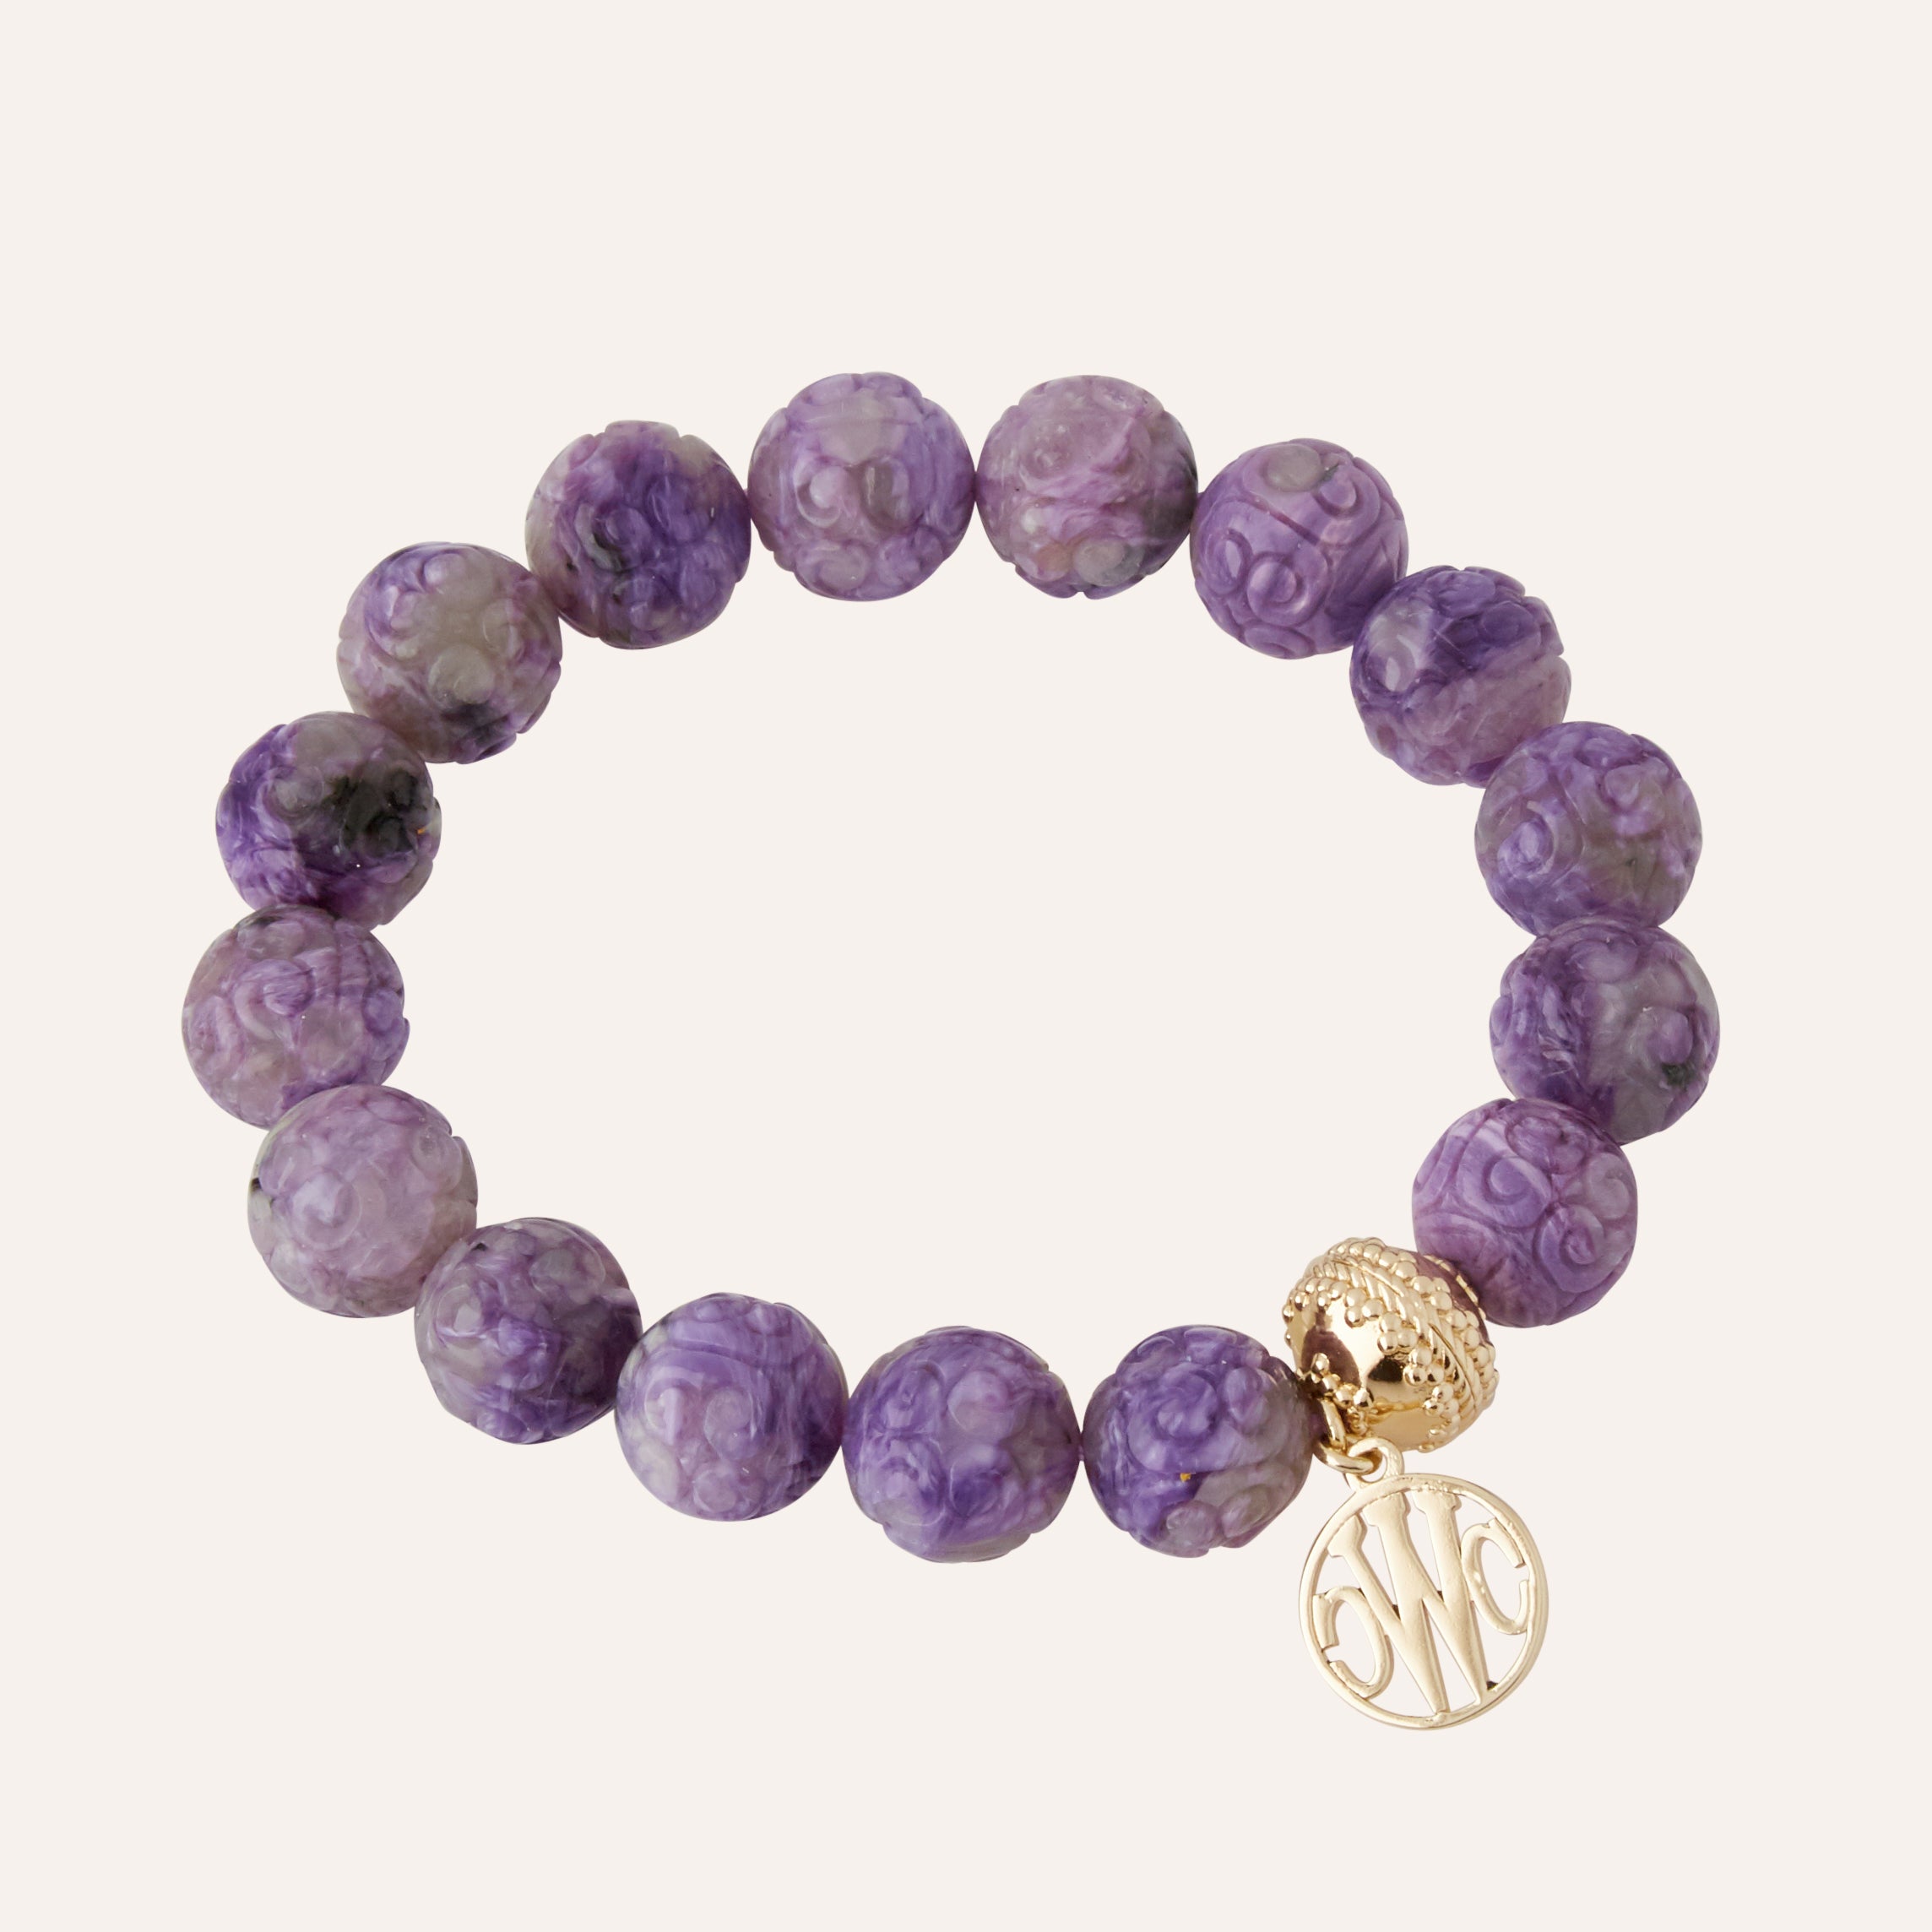 Carved Russian Charoite 12mm Stretch Bracelet